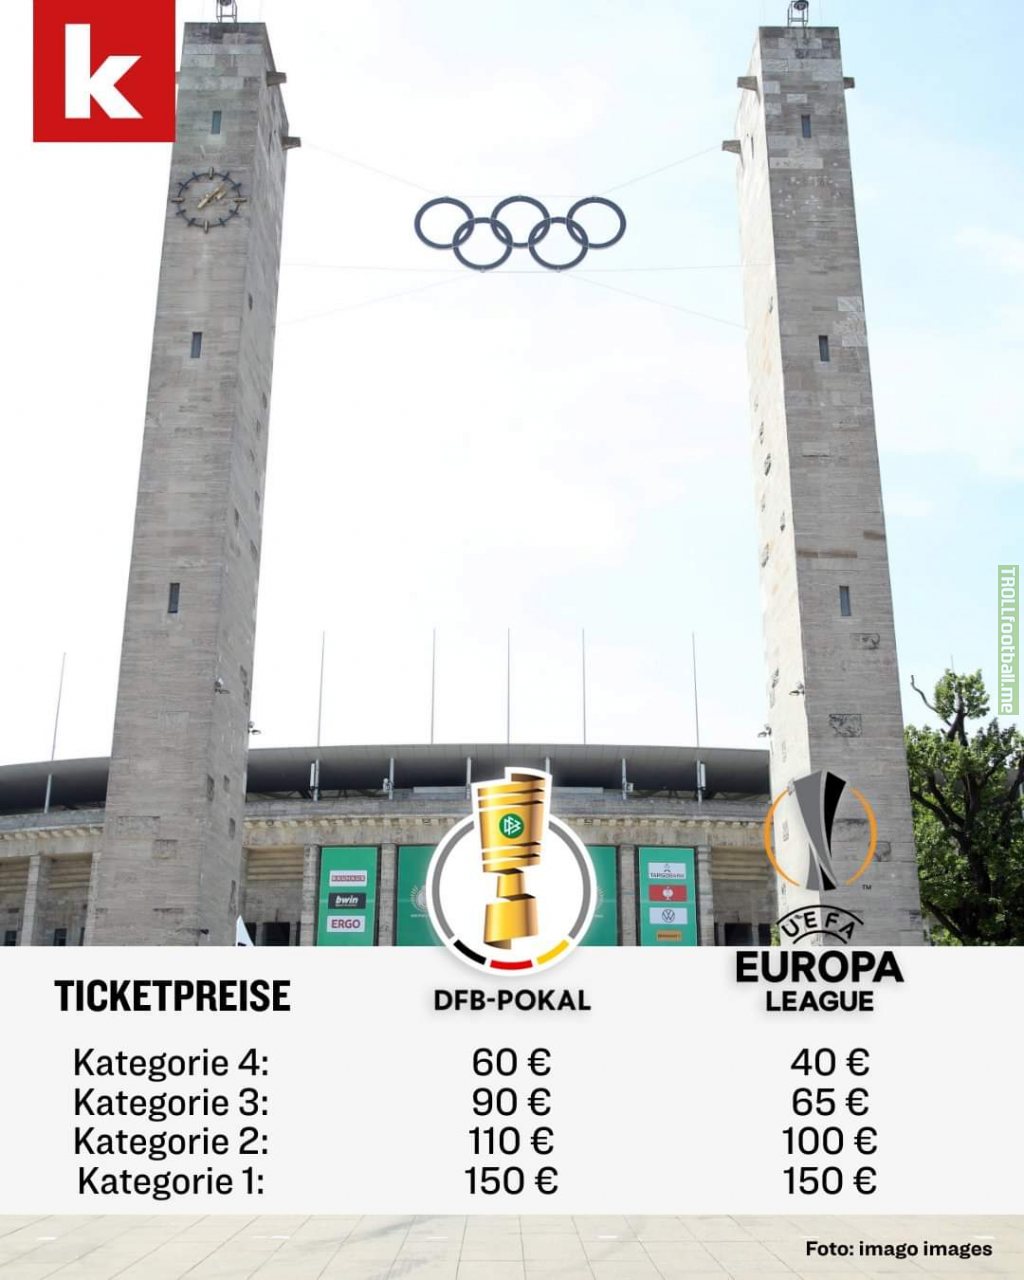 [Kicker] The DFB has set the average price of a ticket for this year's German Cup final higher than for the Europa League final. Children's tickets and the usual discounts (students, trainees, pensioners) are also nowhere to be found.